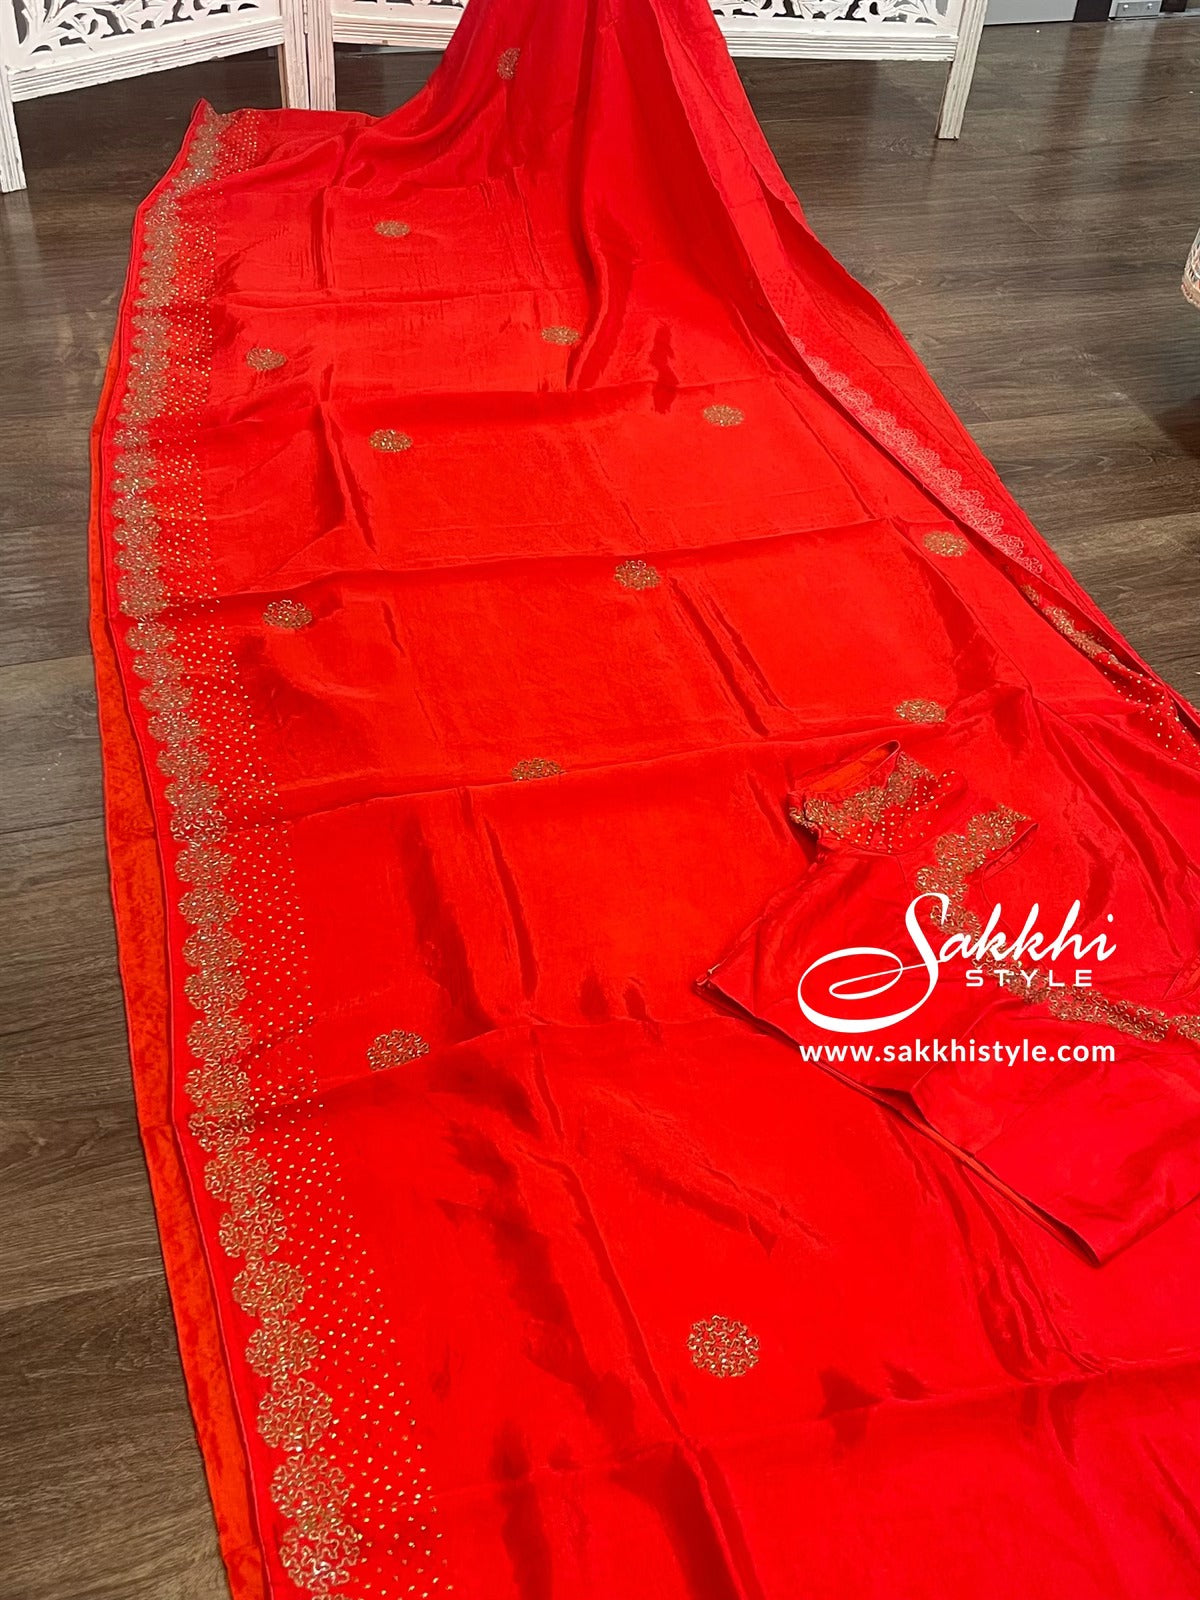 Red Embroidered Saree - Sakkhi Style